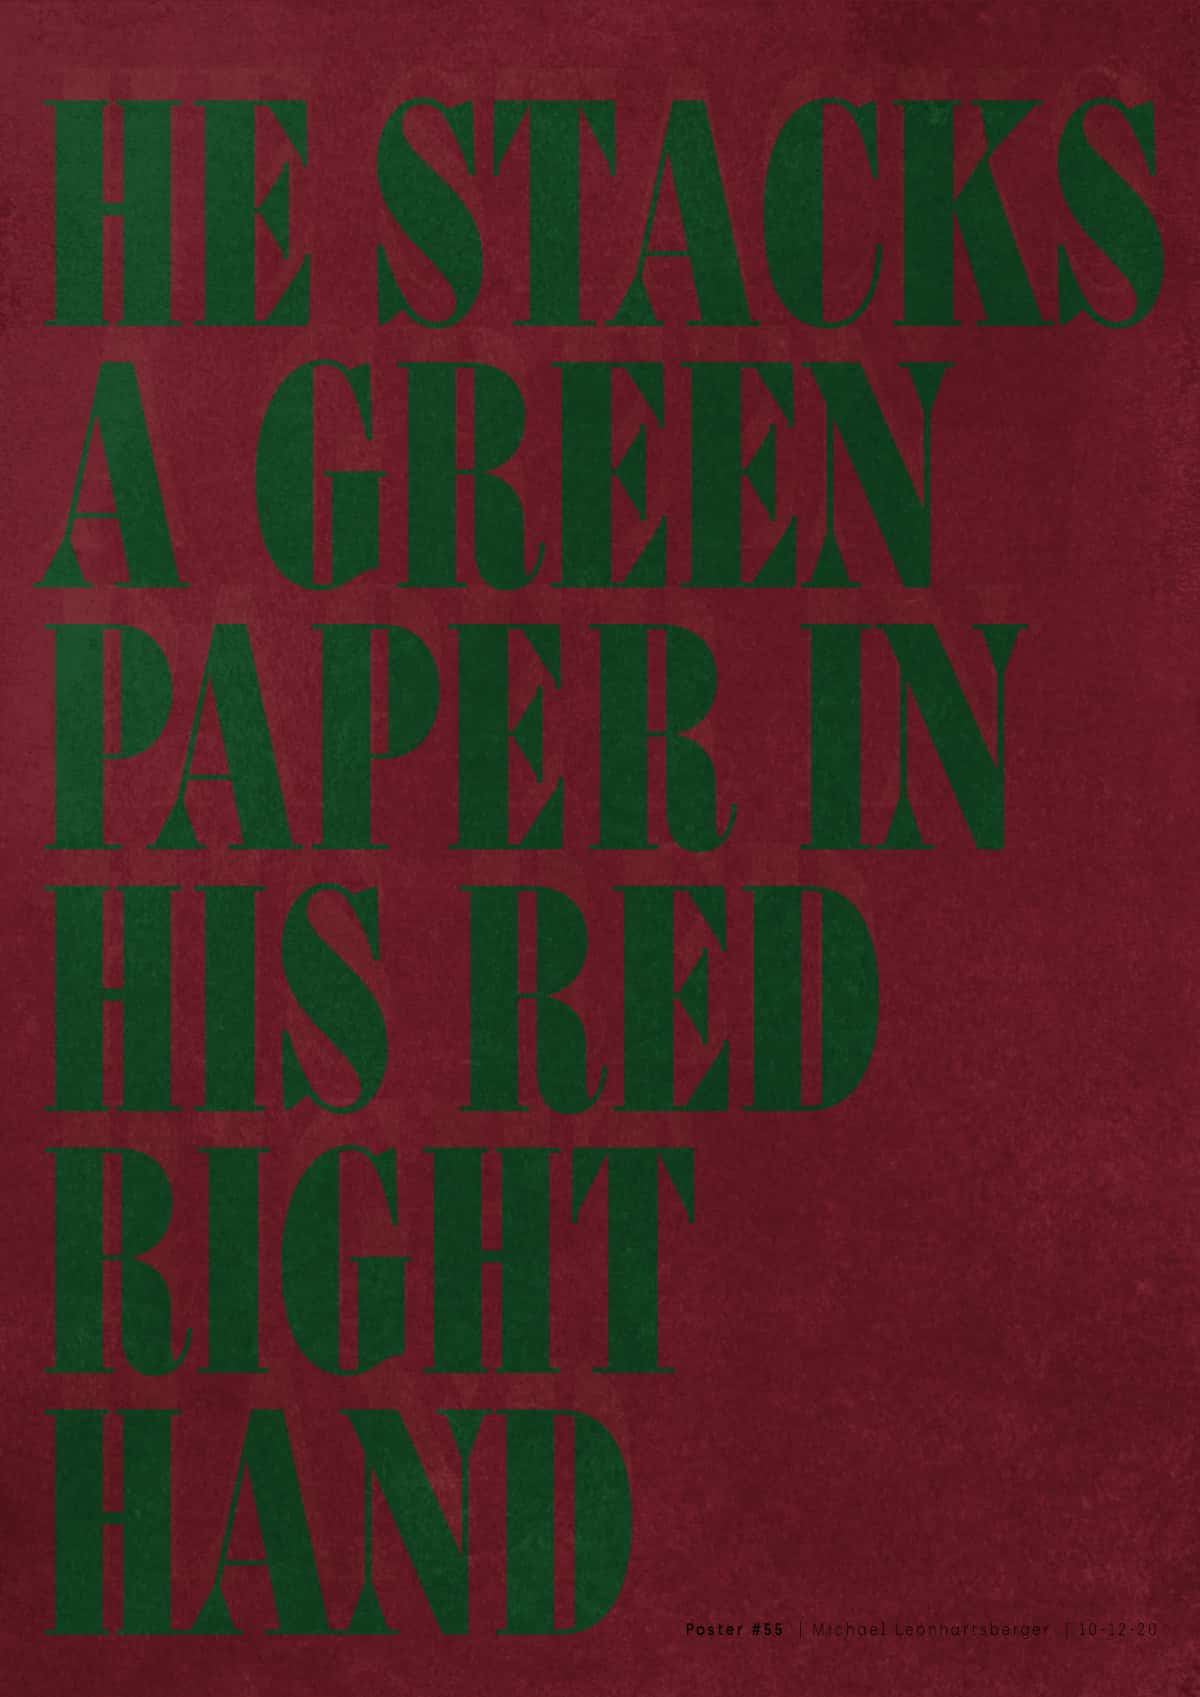 He stacks a green paper in his red right hand – Poster Michael Leonhartsberger